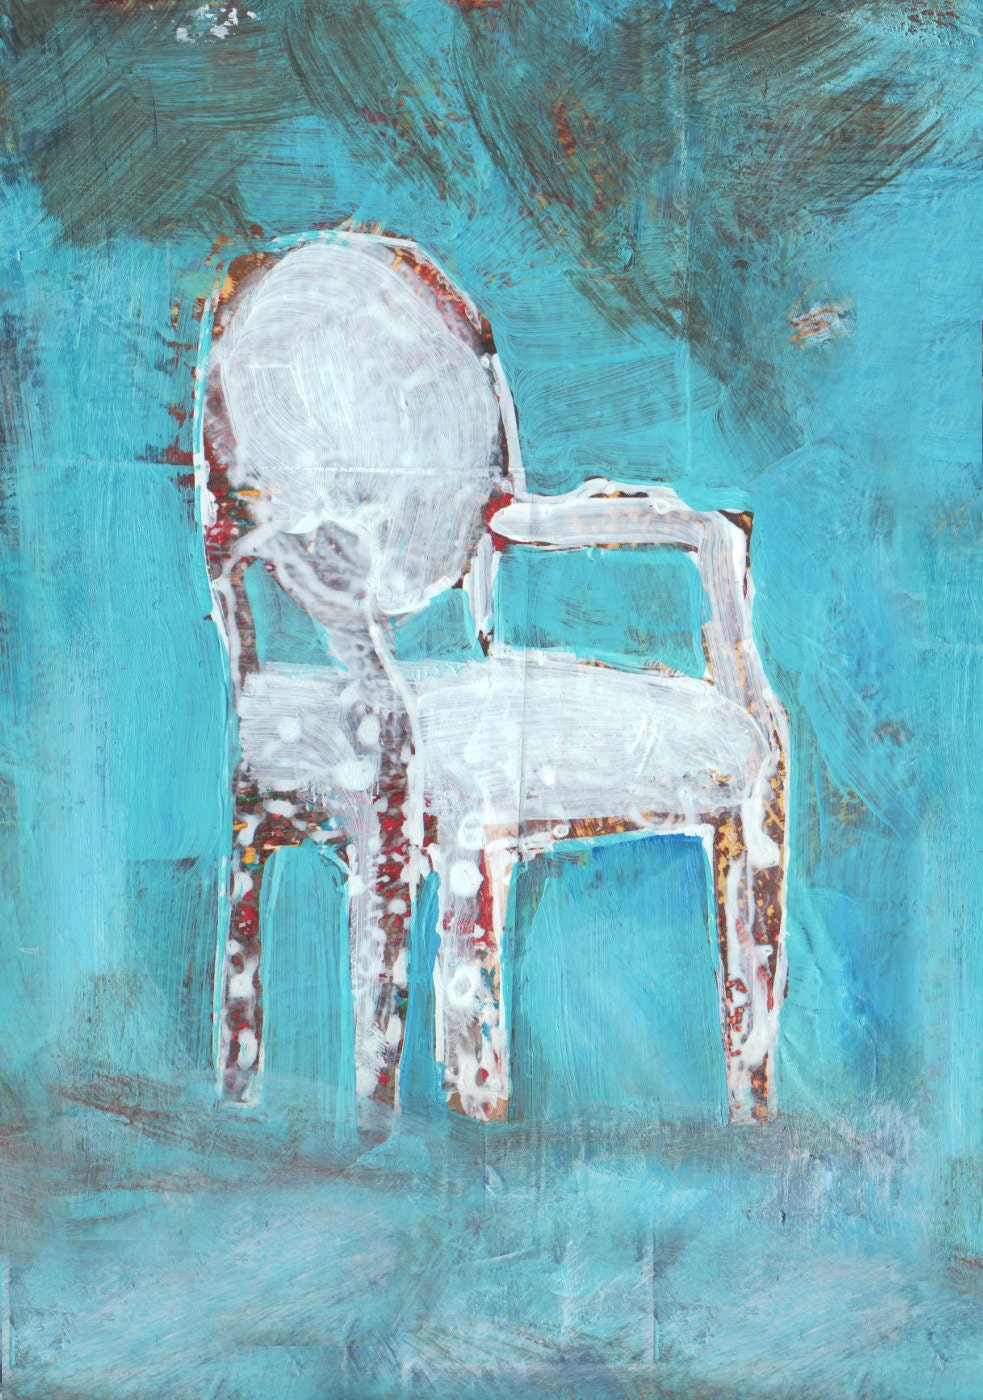 Giclee Print from Original Mixed Media Painting of a Chair - dianamulder